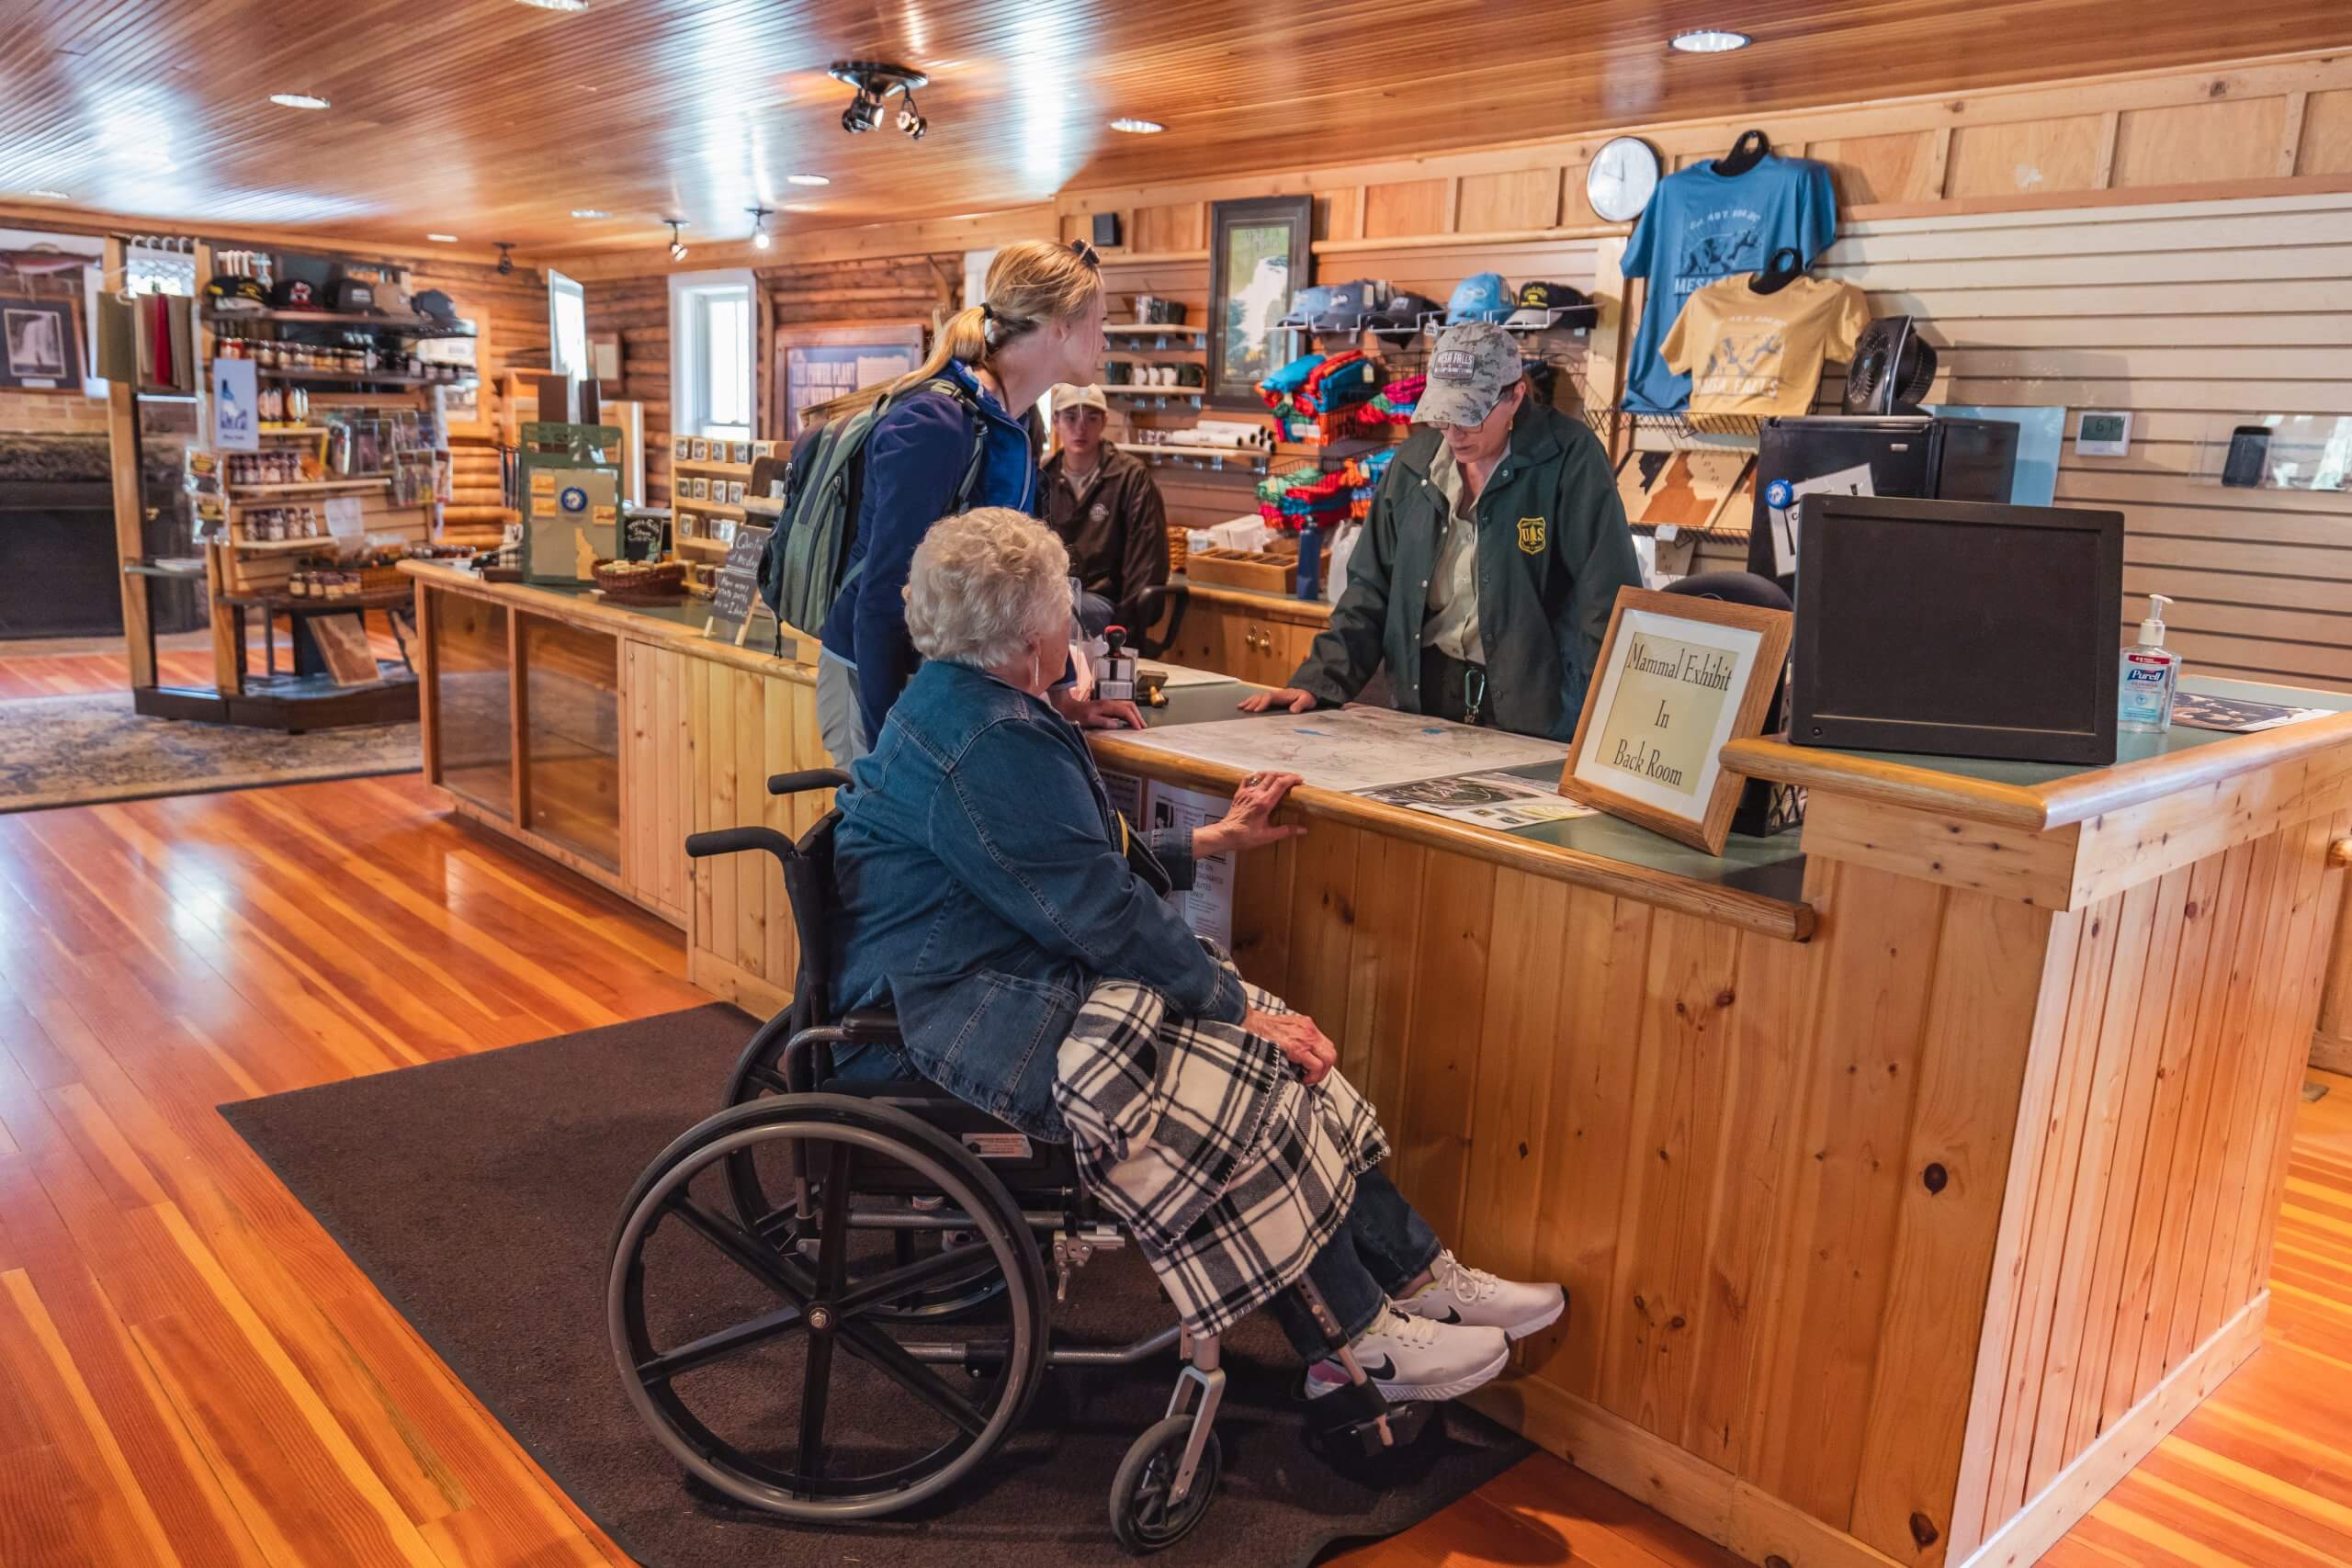 Two women talk with a park ranger inside the Mesa Falls Visitor Center.